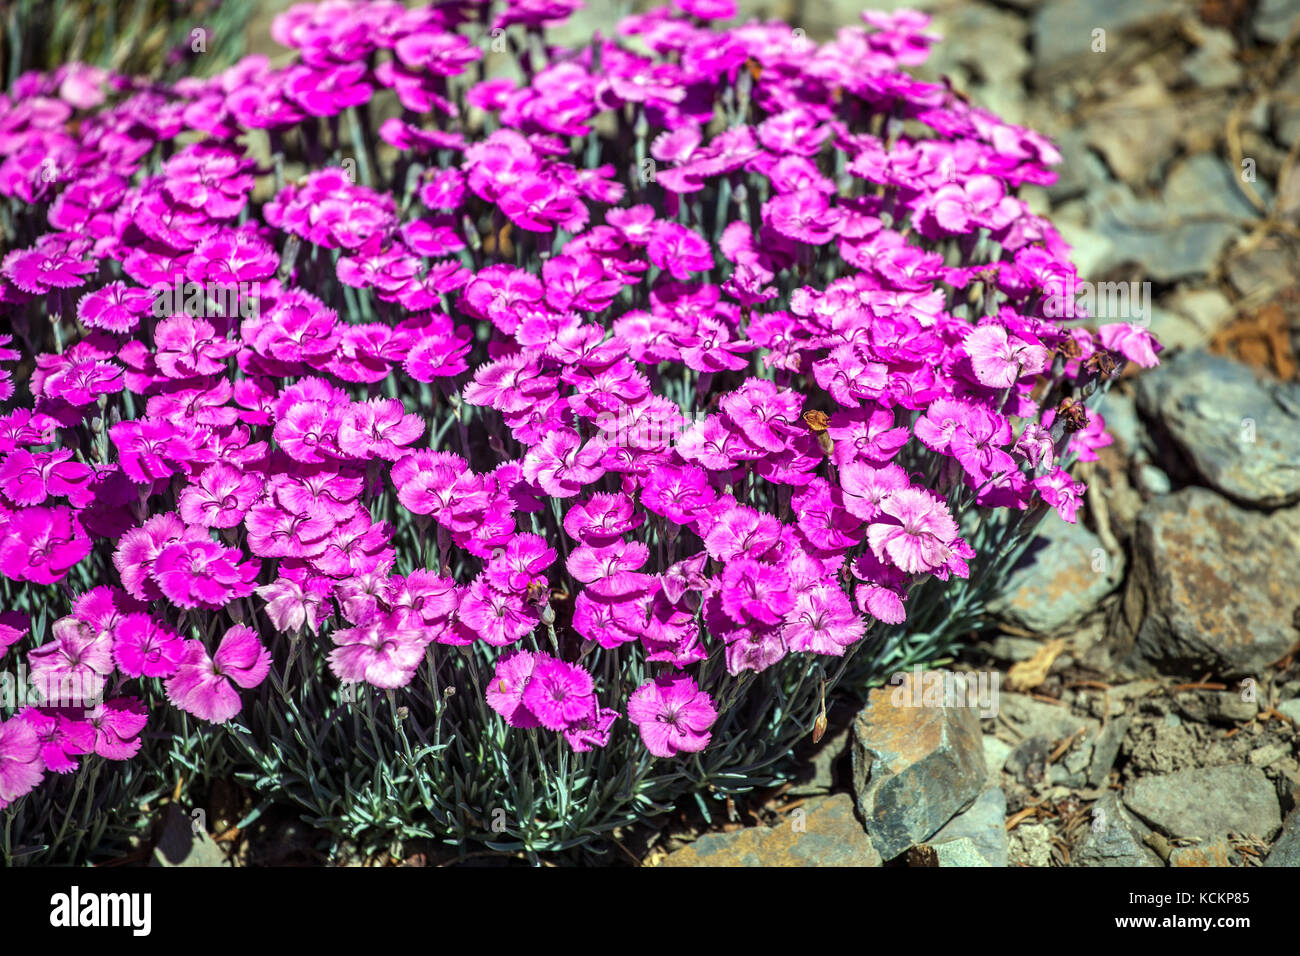 Dianthus 'Whatfield Magenta' Purple Rockery Garden Flowers Blooming Deep Pink Blooms Alpine Plant Growing Dry Ground cover Place Dianthus Tuft Blooms Stock Photo